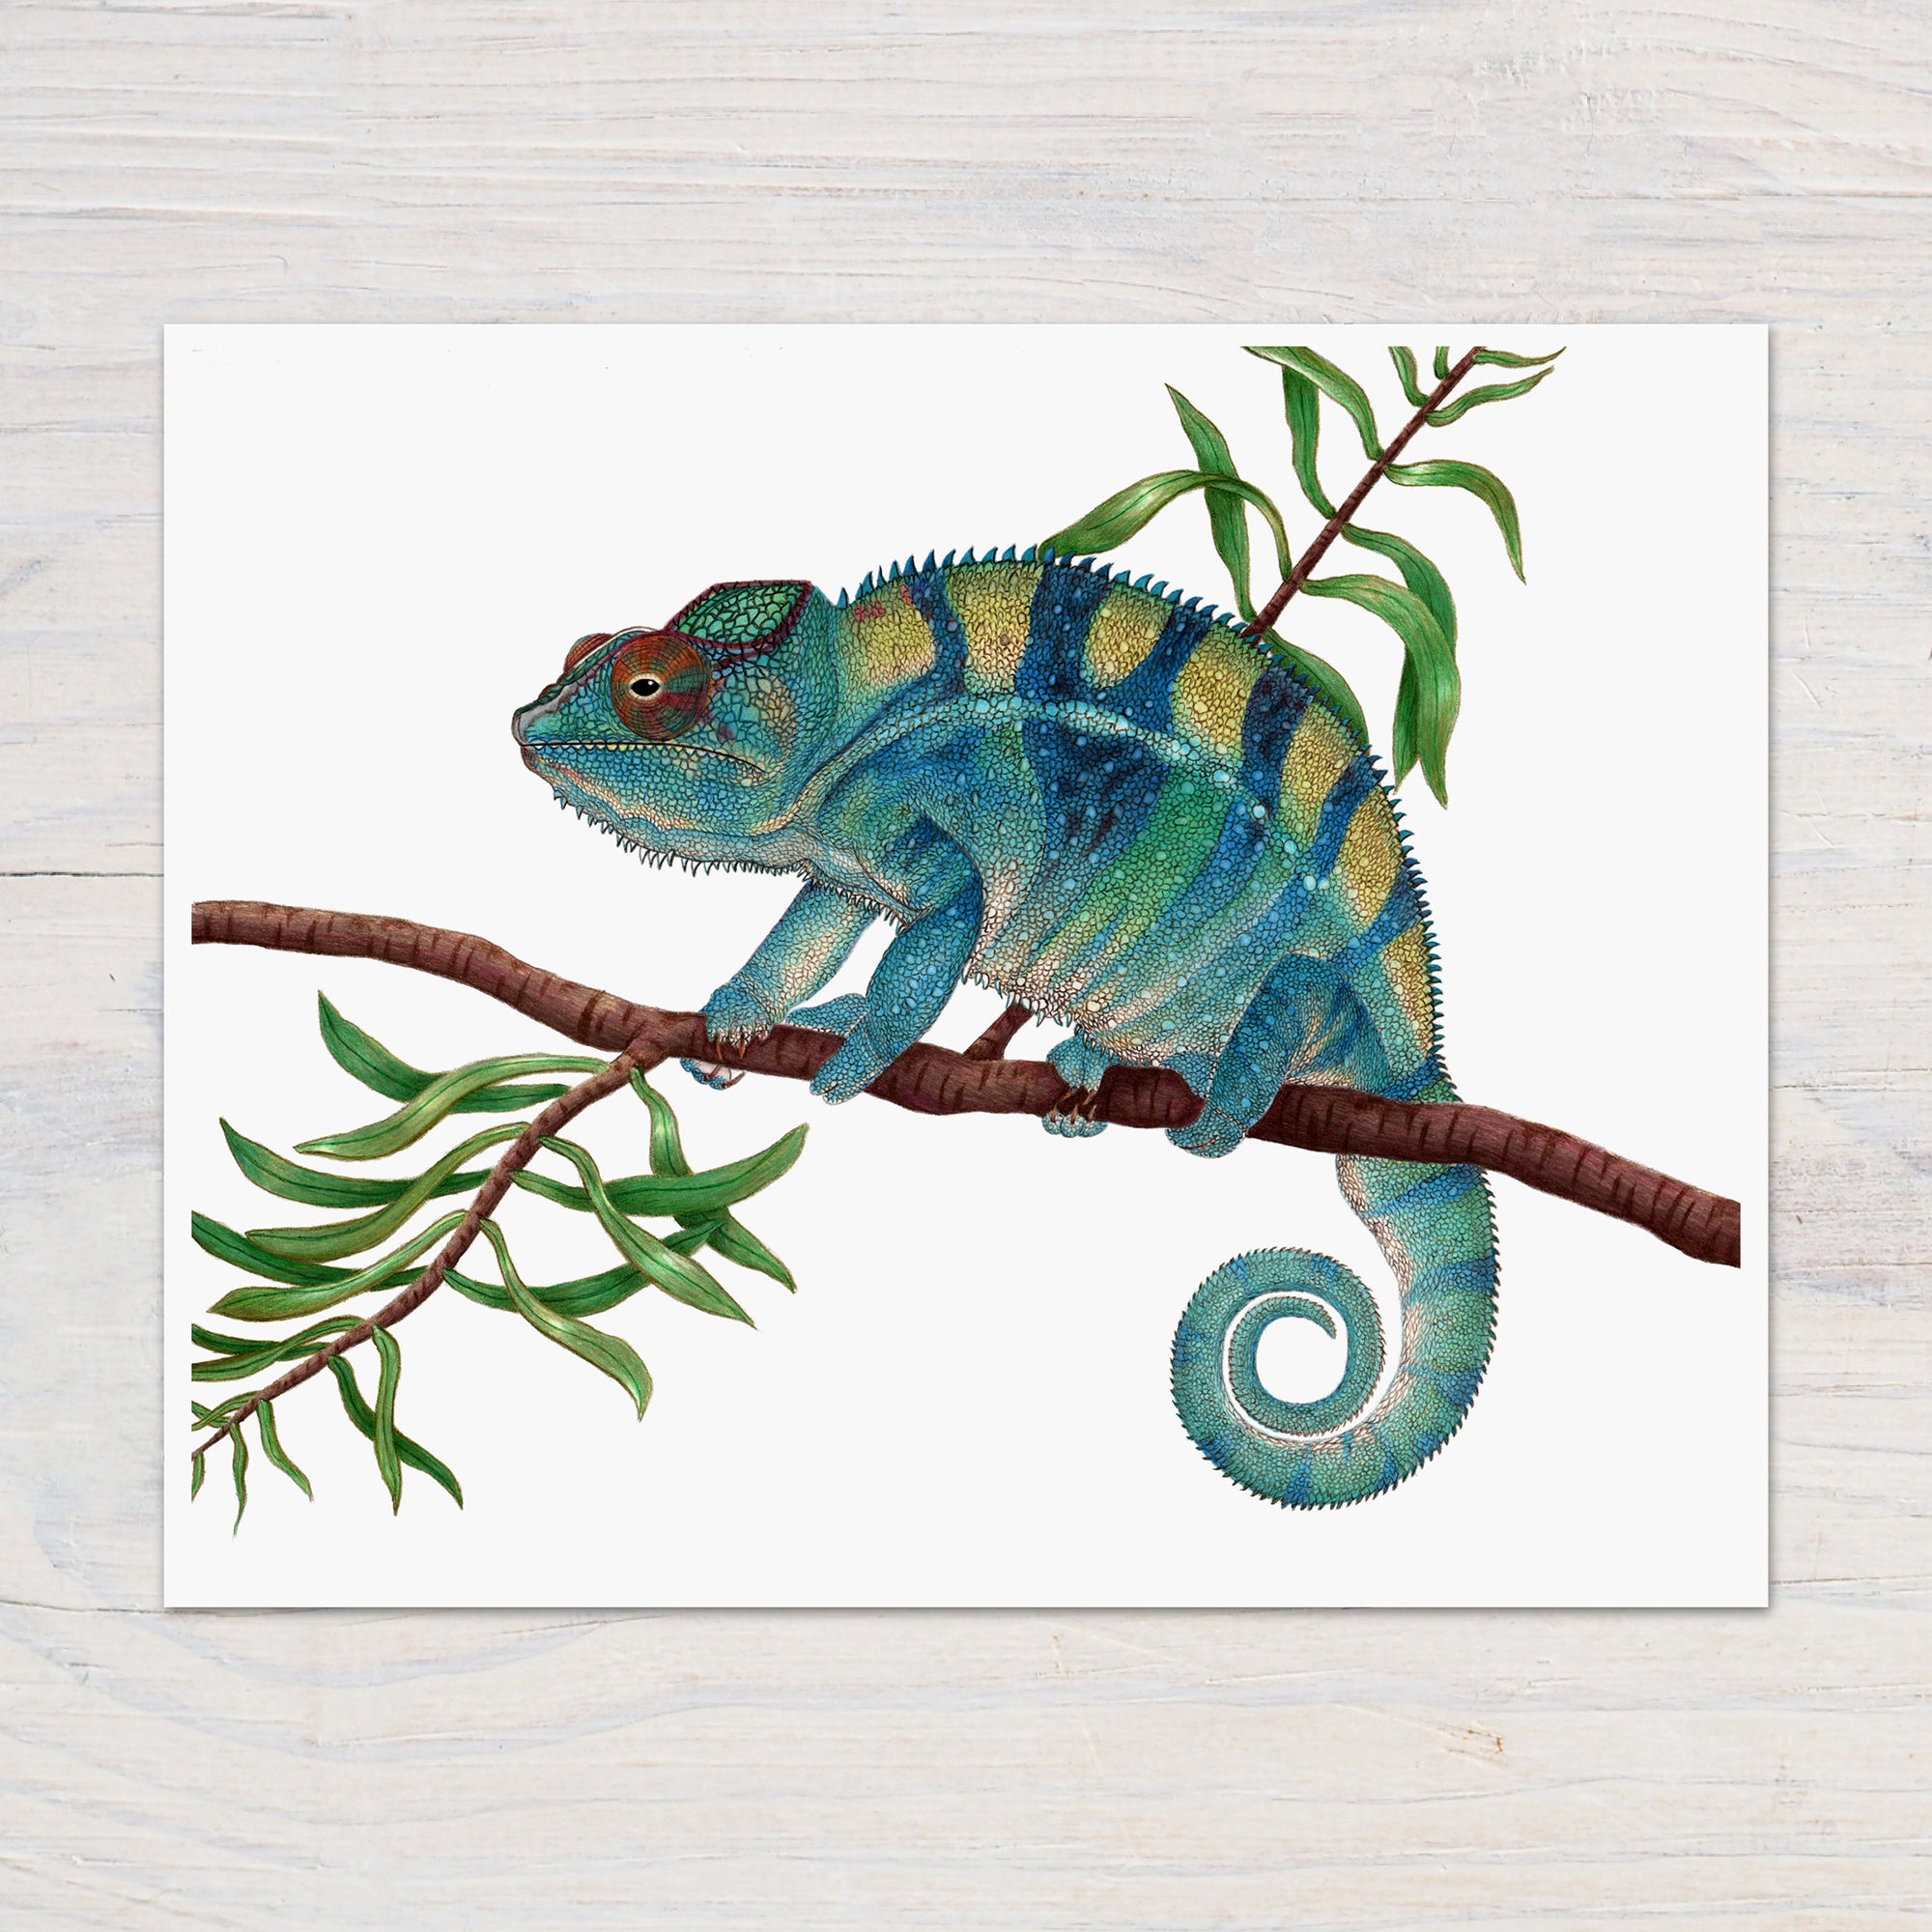 panther chameleon drawing